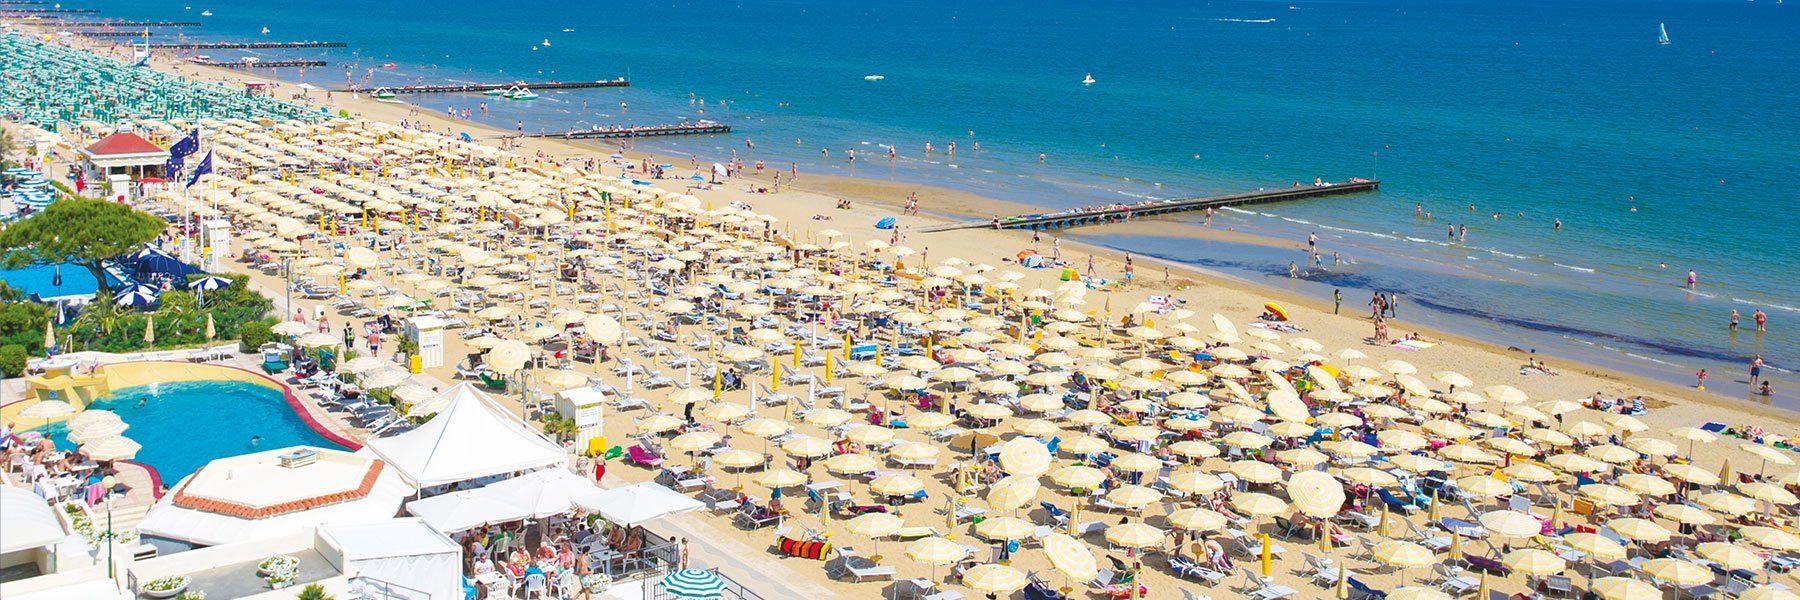 Lido di Jesolo, which is lined with parasols , and where many people take a swim in the turquoise Mediterranean Seasea.